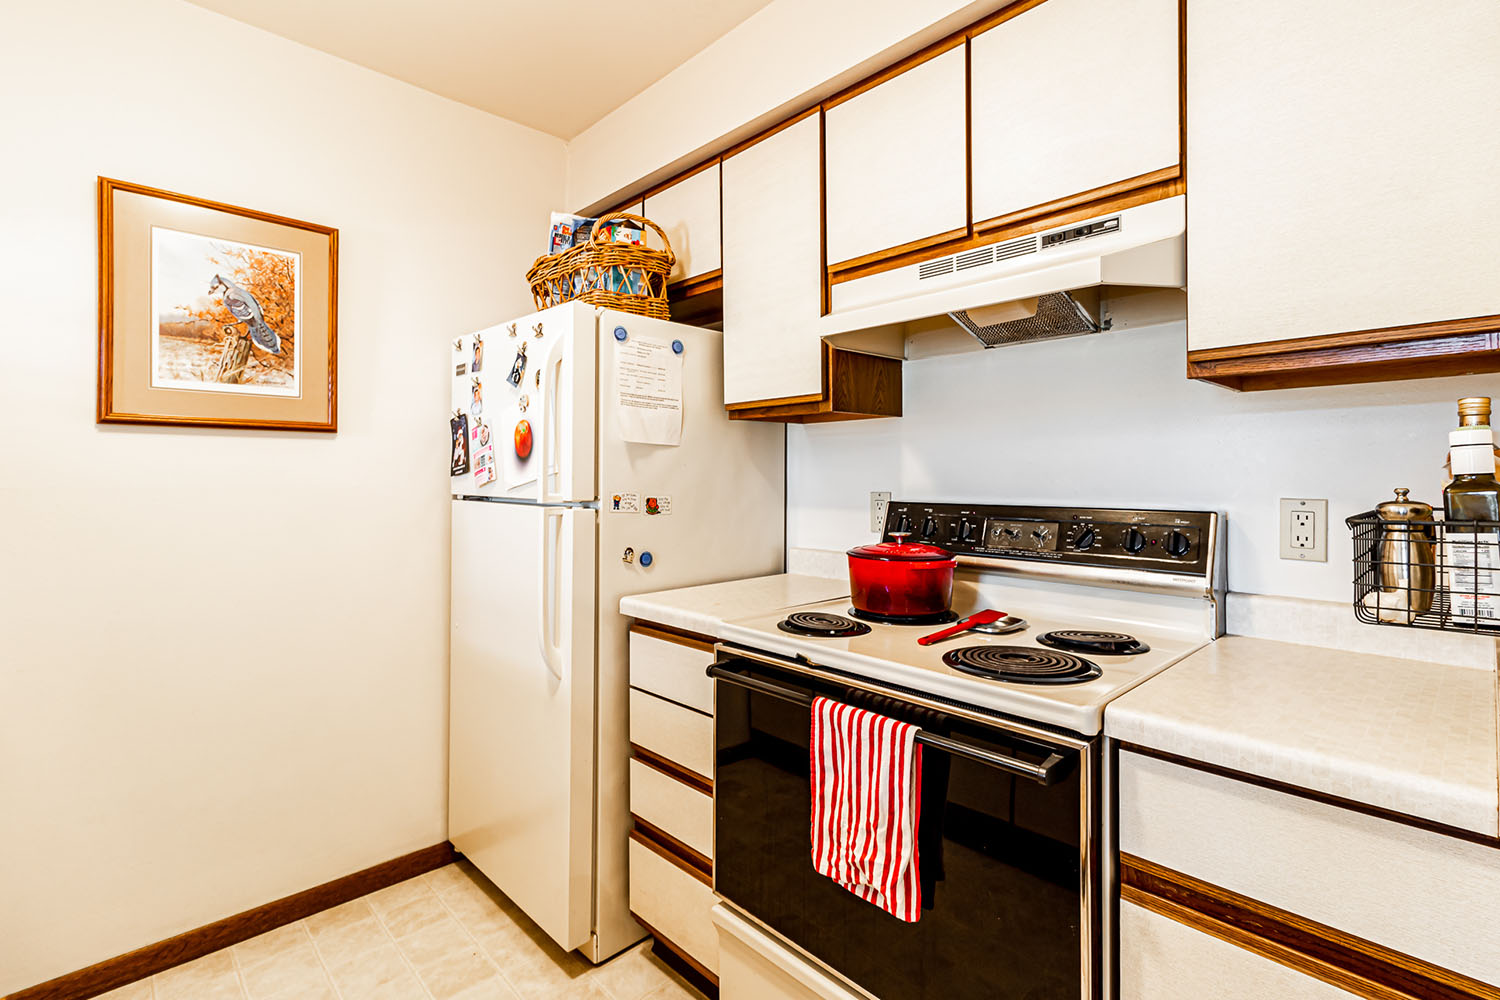 An apartment galley kitchen, view of the stove and fridge